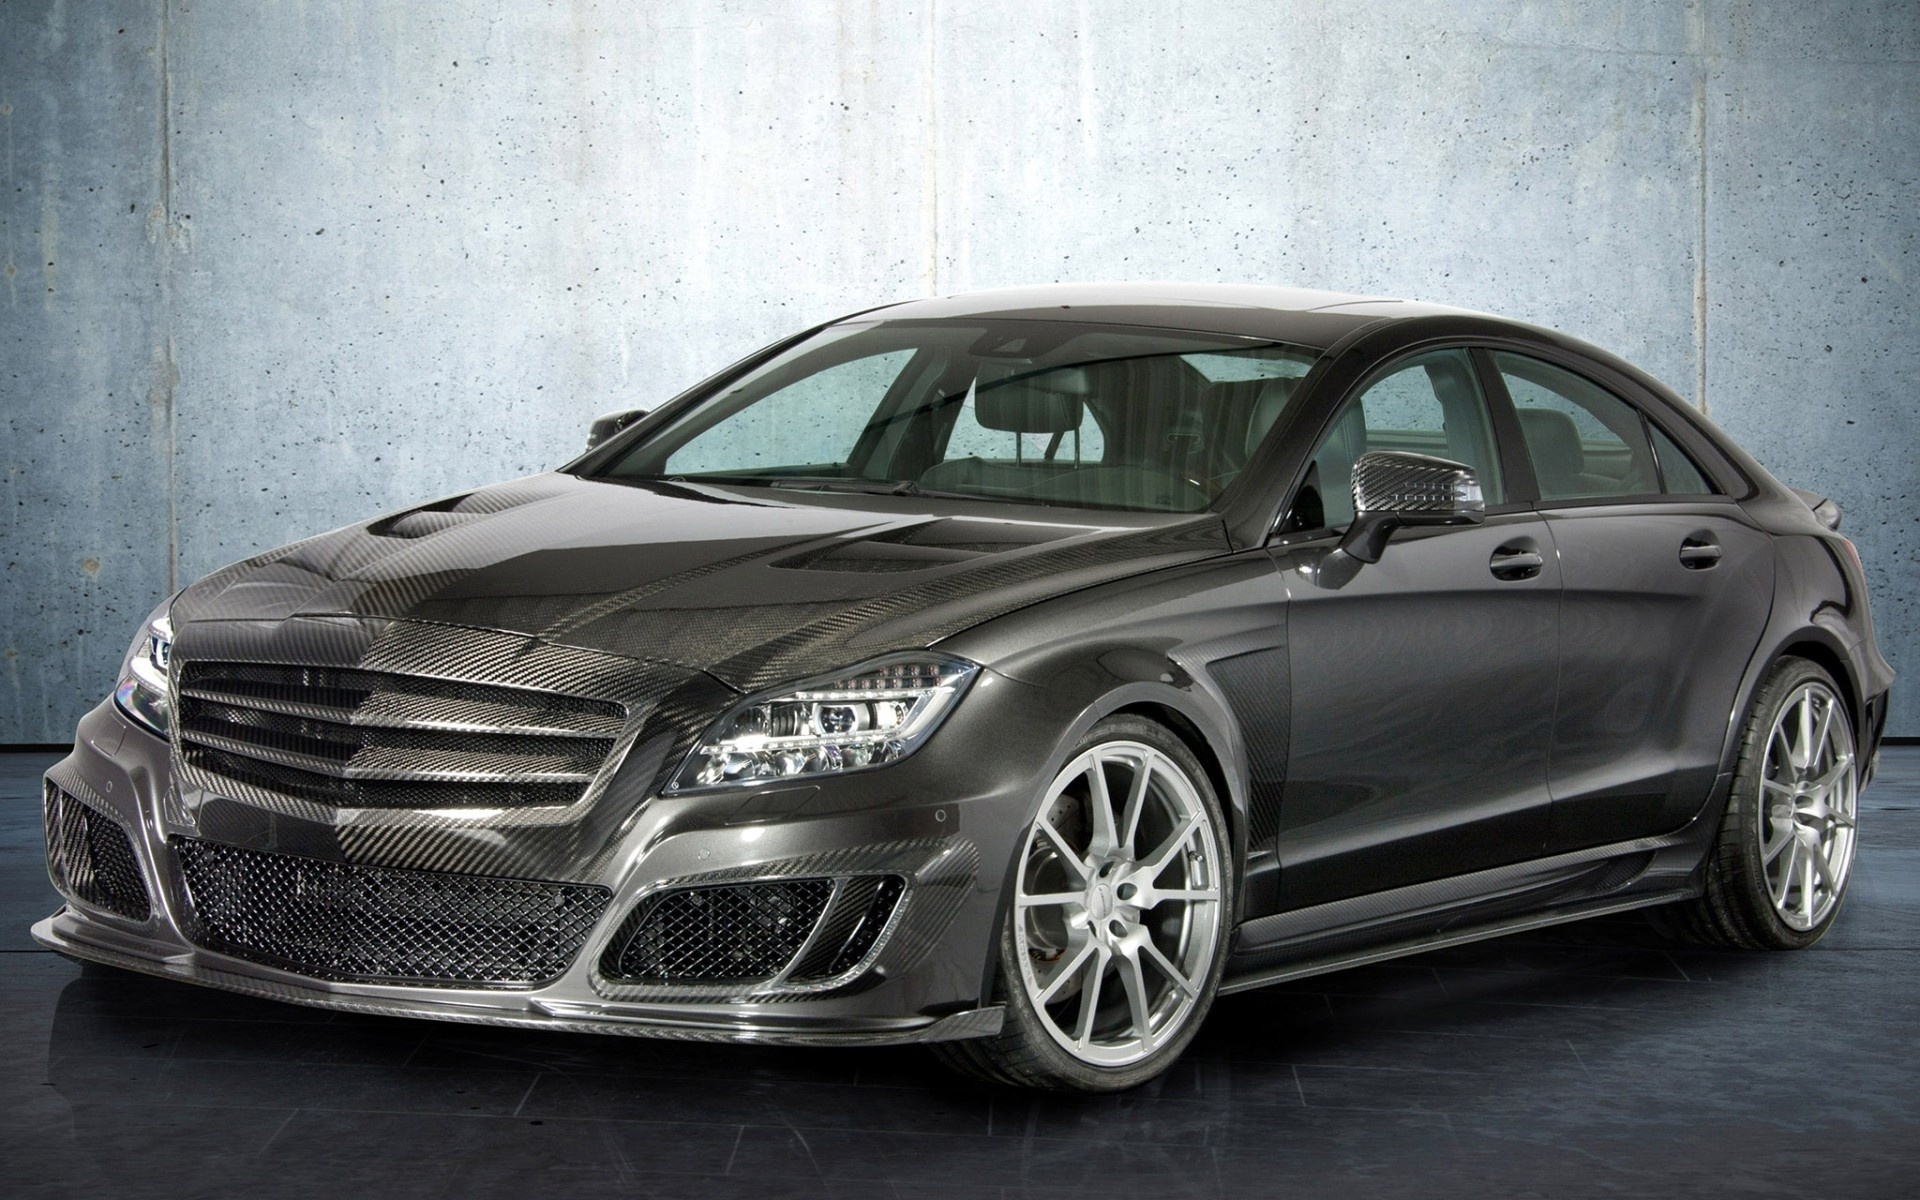 , , mansory, , 63, , mercedes, 63, amg, , cls